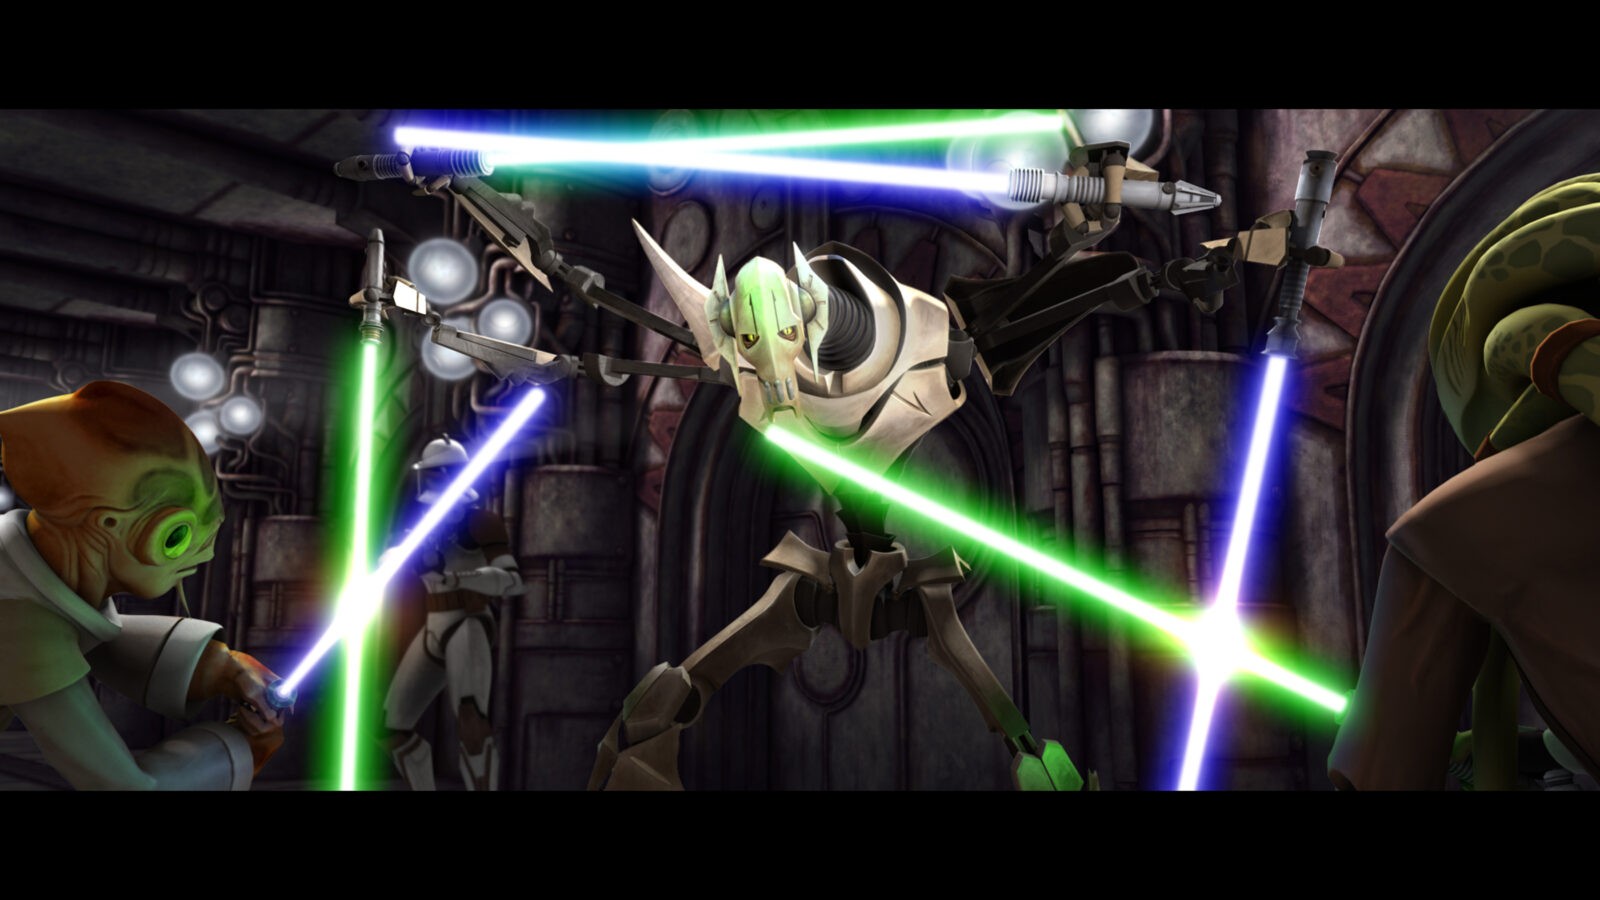 STAR WARS: "A New Hope" for fans of the axed Clone Wars.